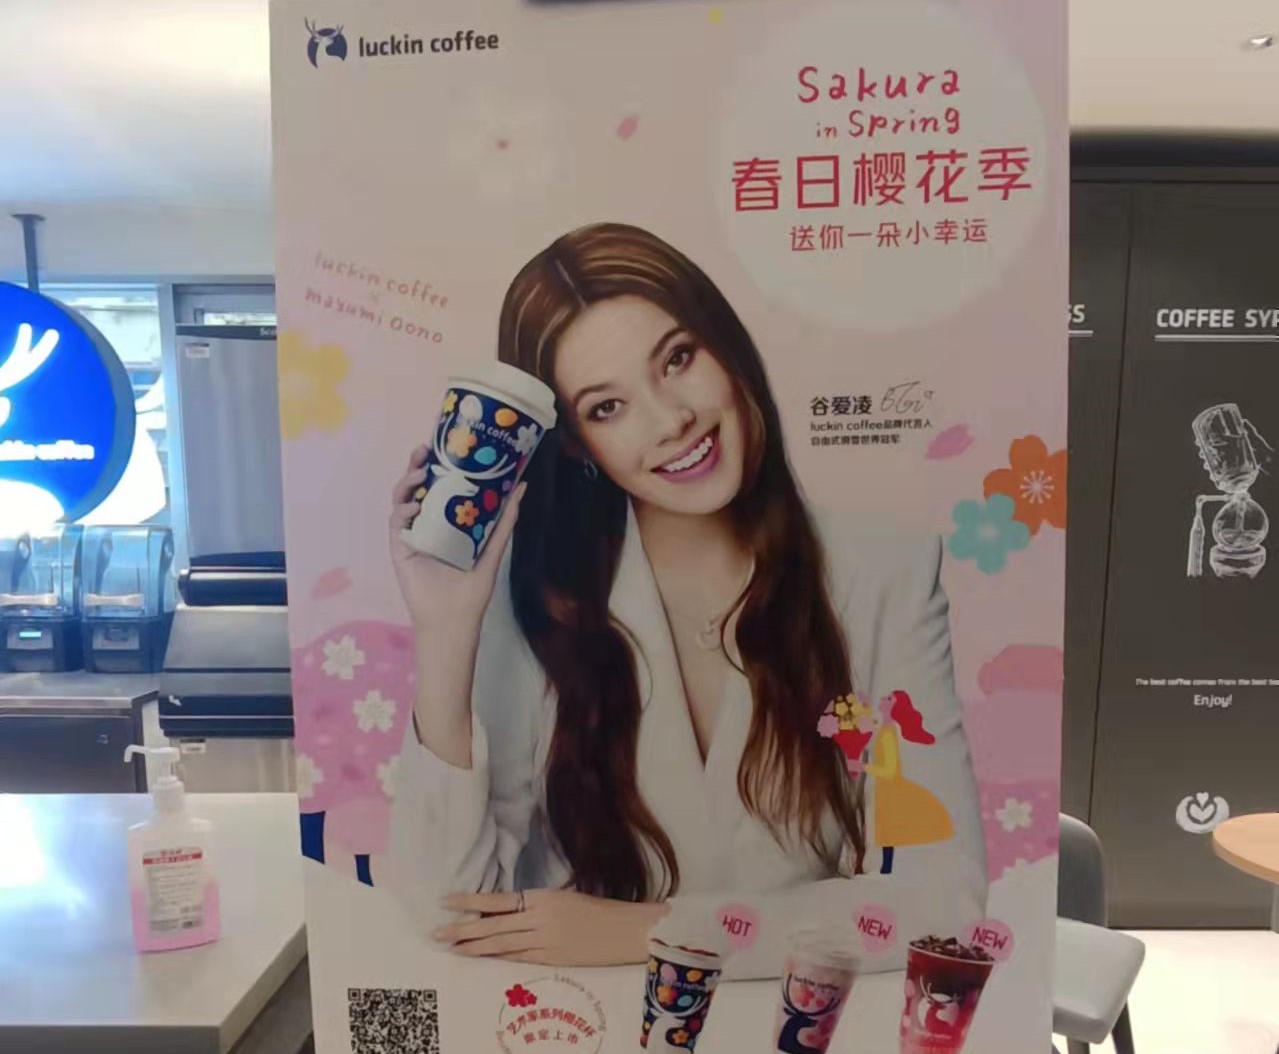 Luckin Now Has 467 More Stores in China Than Starbucks